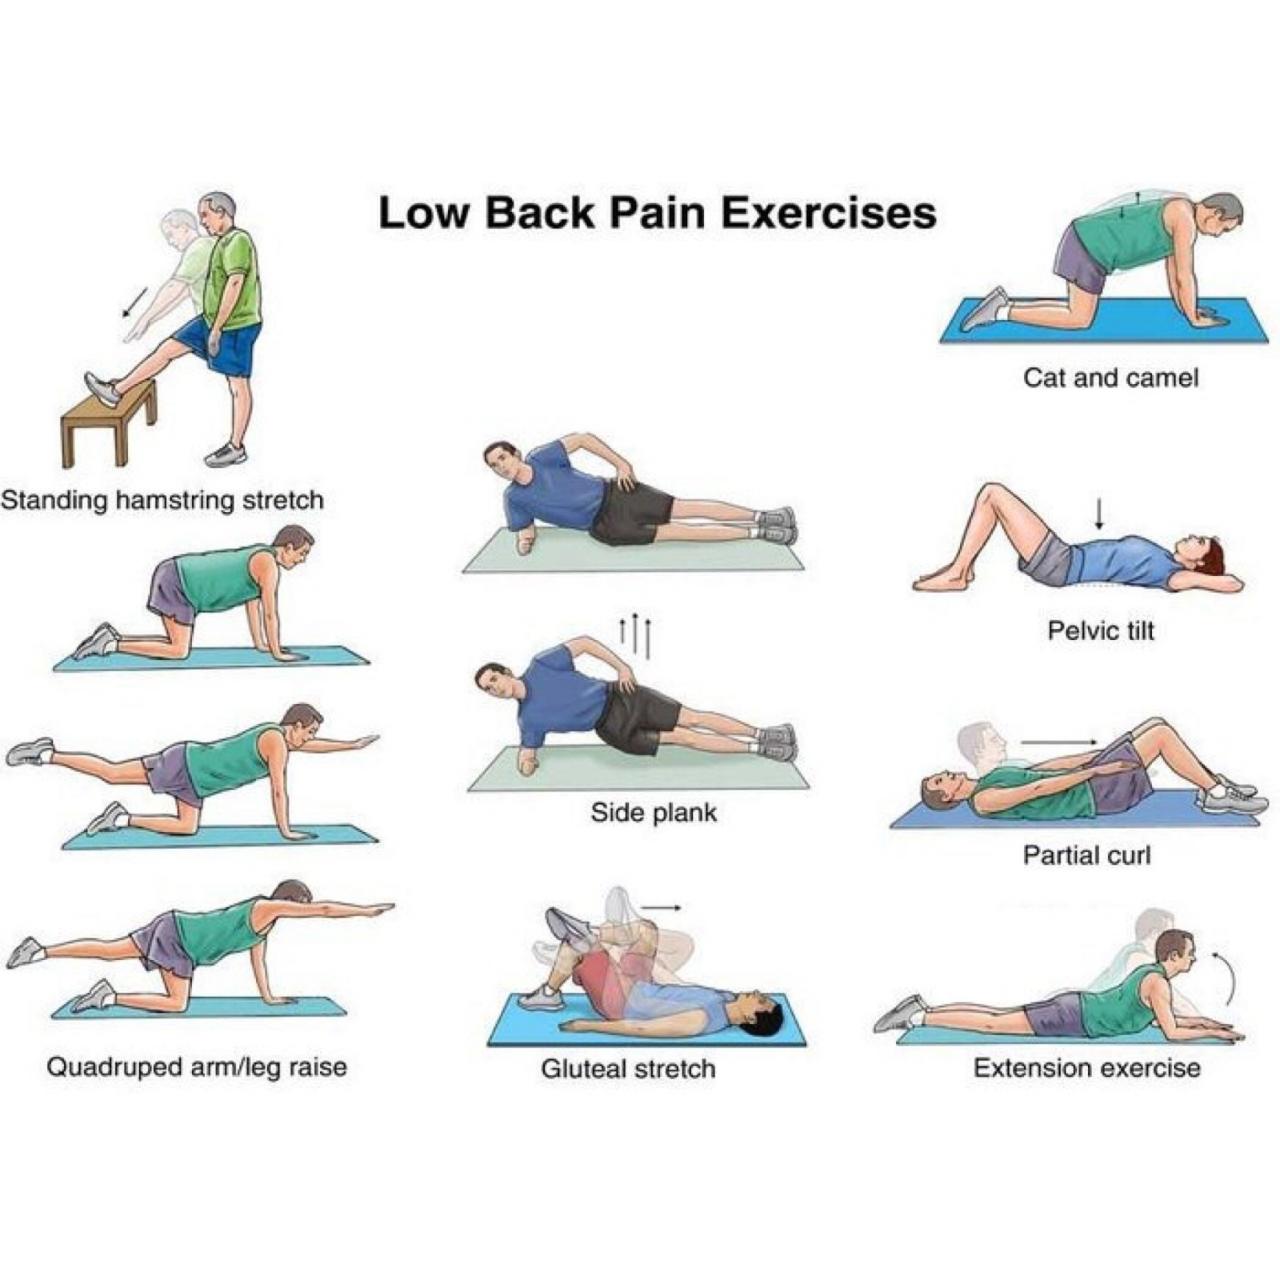 Fat back exercises workouts workout lose rid exercise upper live work